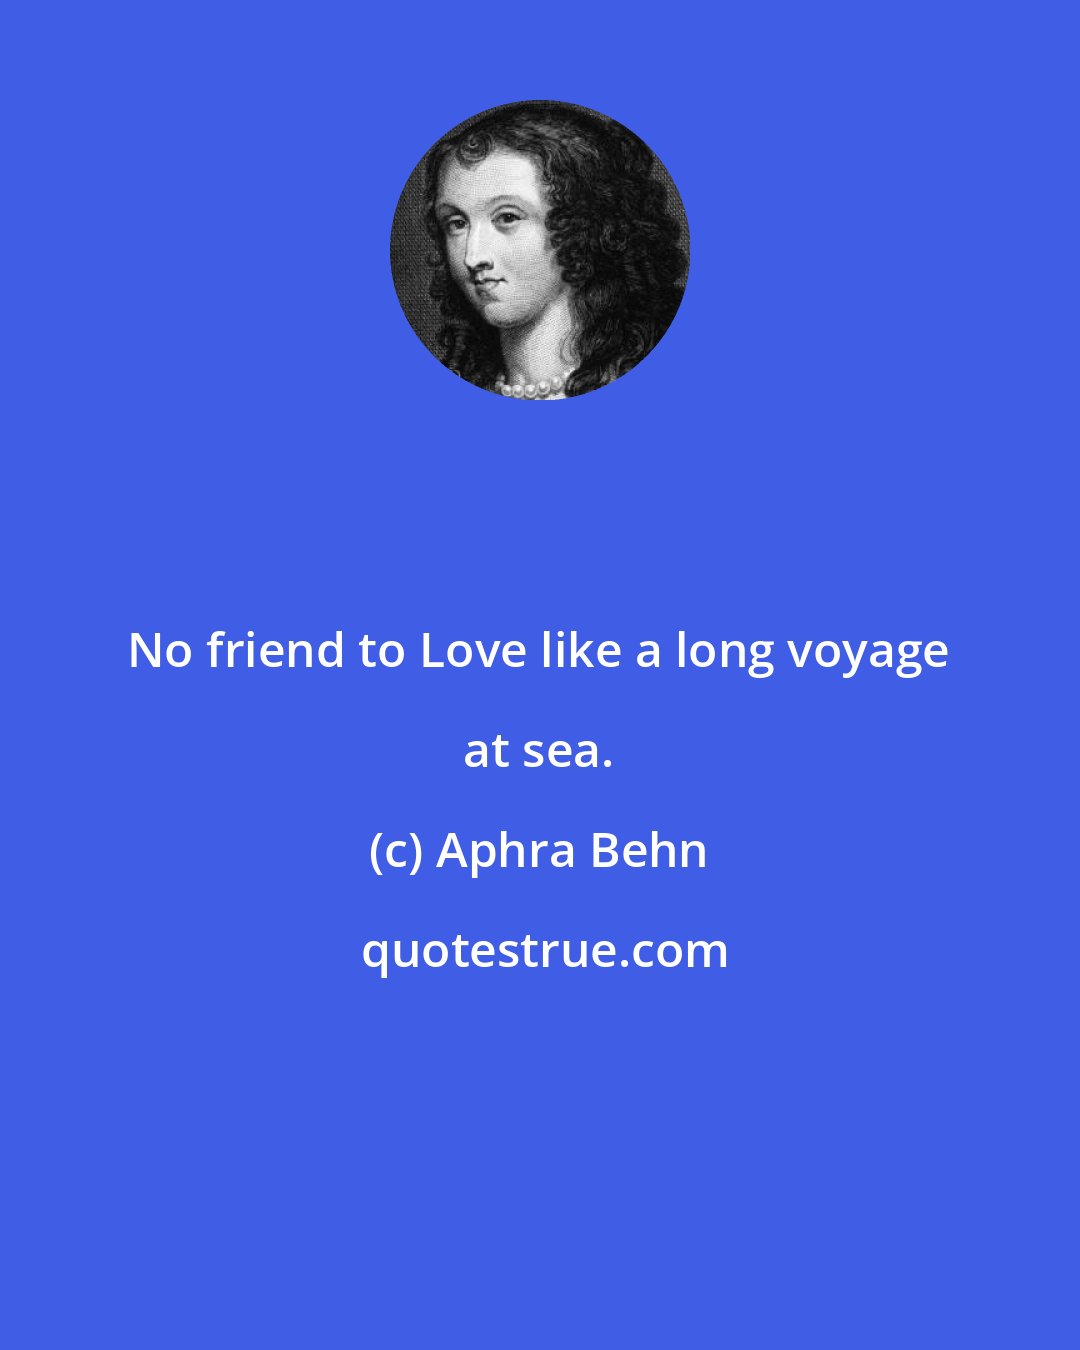 Aphra Behn: No friend to Love like a long voyage at sea.